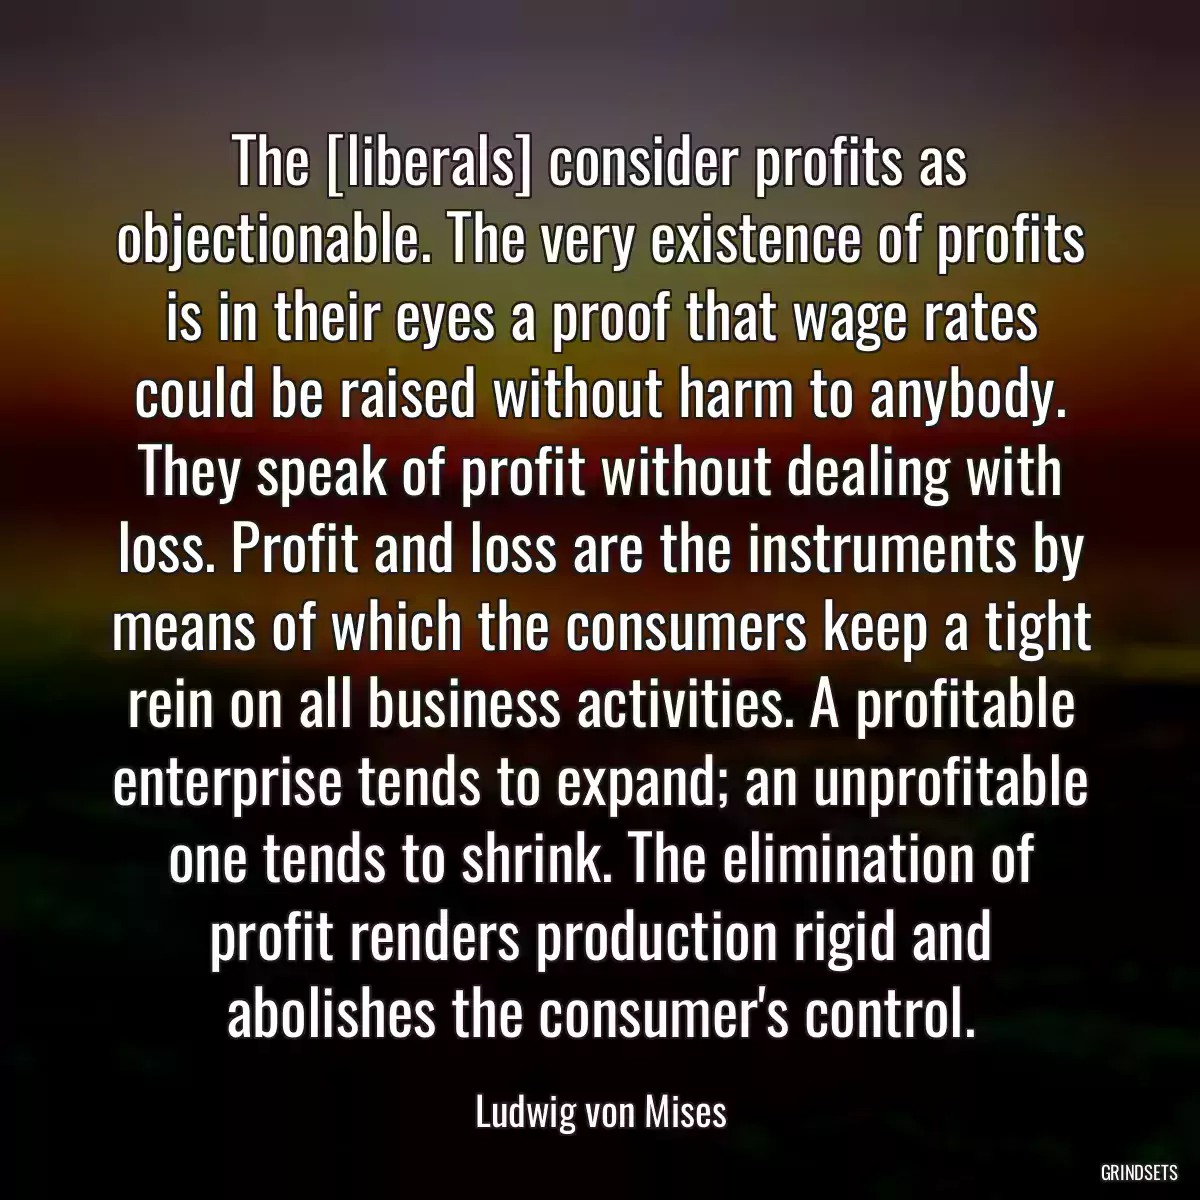 The [liberals] consider profits as objectionable. The very existence of profits is in their eyes a proof that wage rates could be raised without harm to anybody. They speak of profit without dealing with loss. Profit and loss are the instruments by means of which the consumers keep a tight rein on all business activities. A profitable enterprise tends to expand; an unprofitable one tends to shrink. The elimination of profit renders production rigid and abolishes the consumer\'s control.